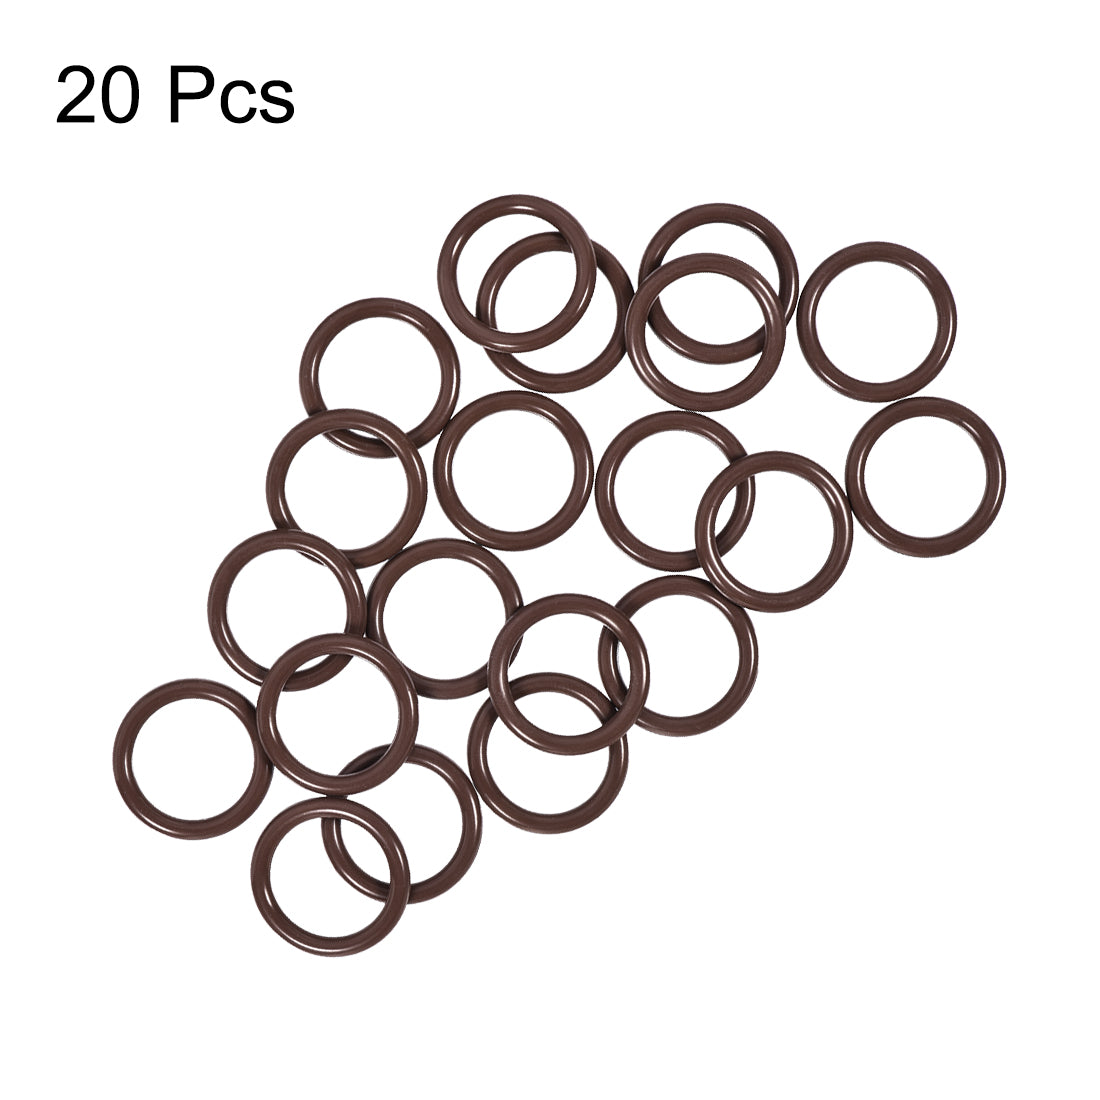 uxcell Uxcell Fluorine Rubber O-Rings OD ID 2.5mm Width FKM Seal Gasket Brown 20 Pieces